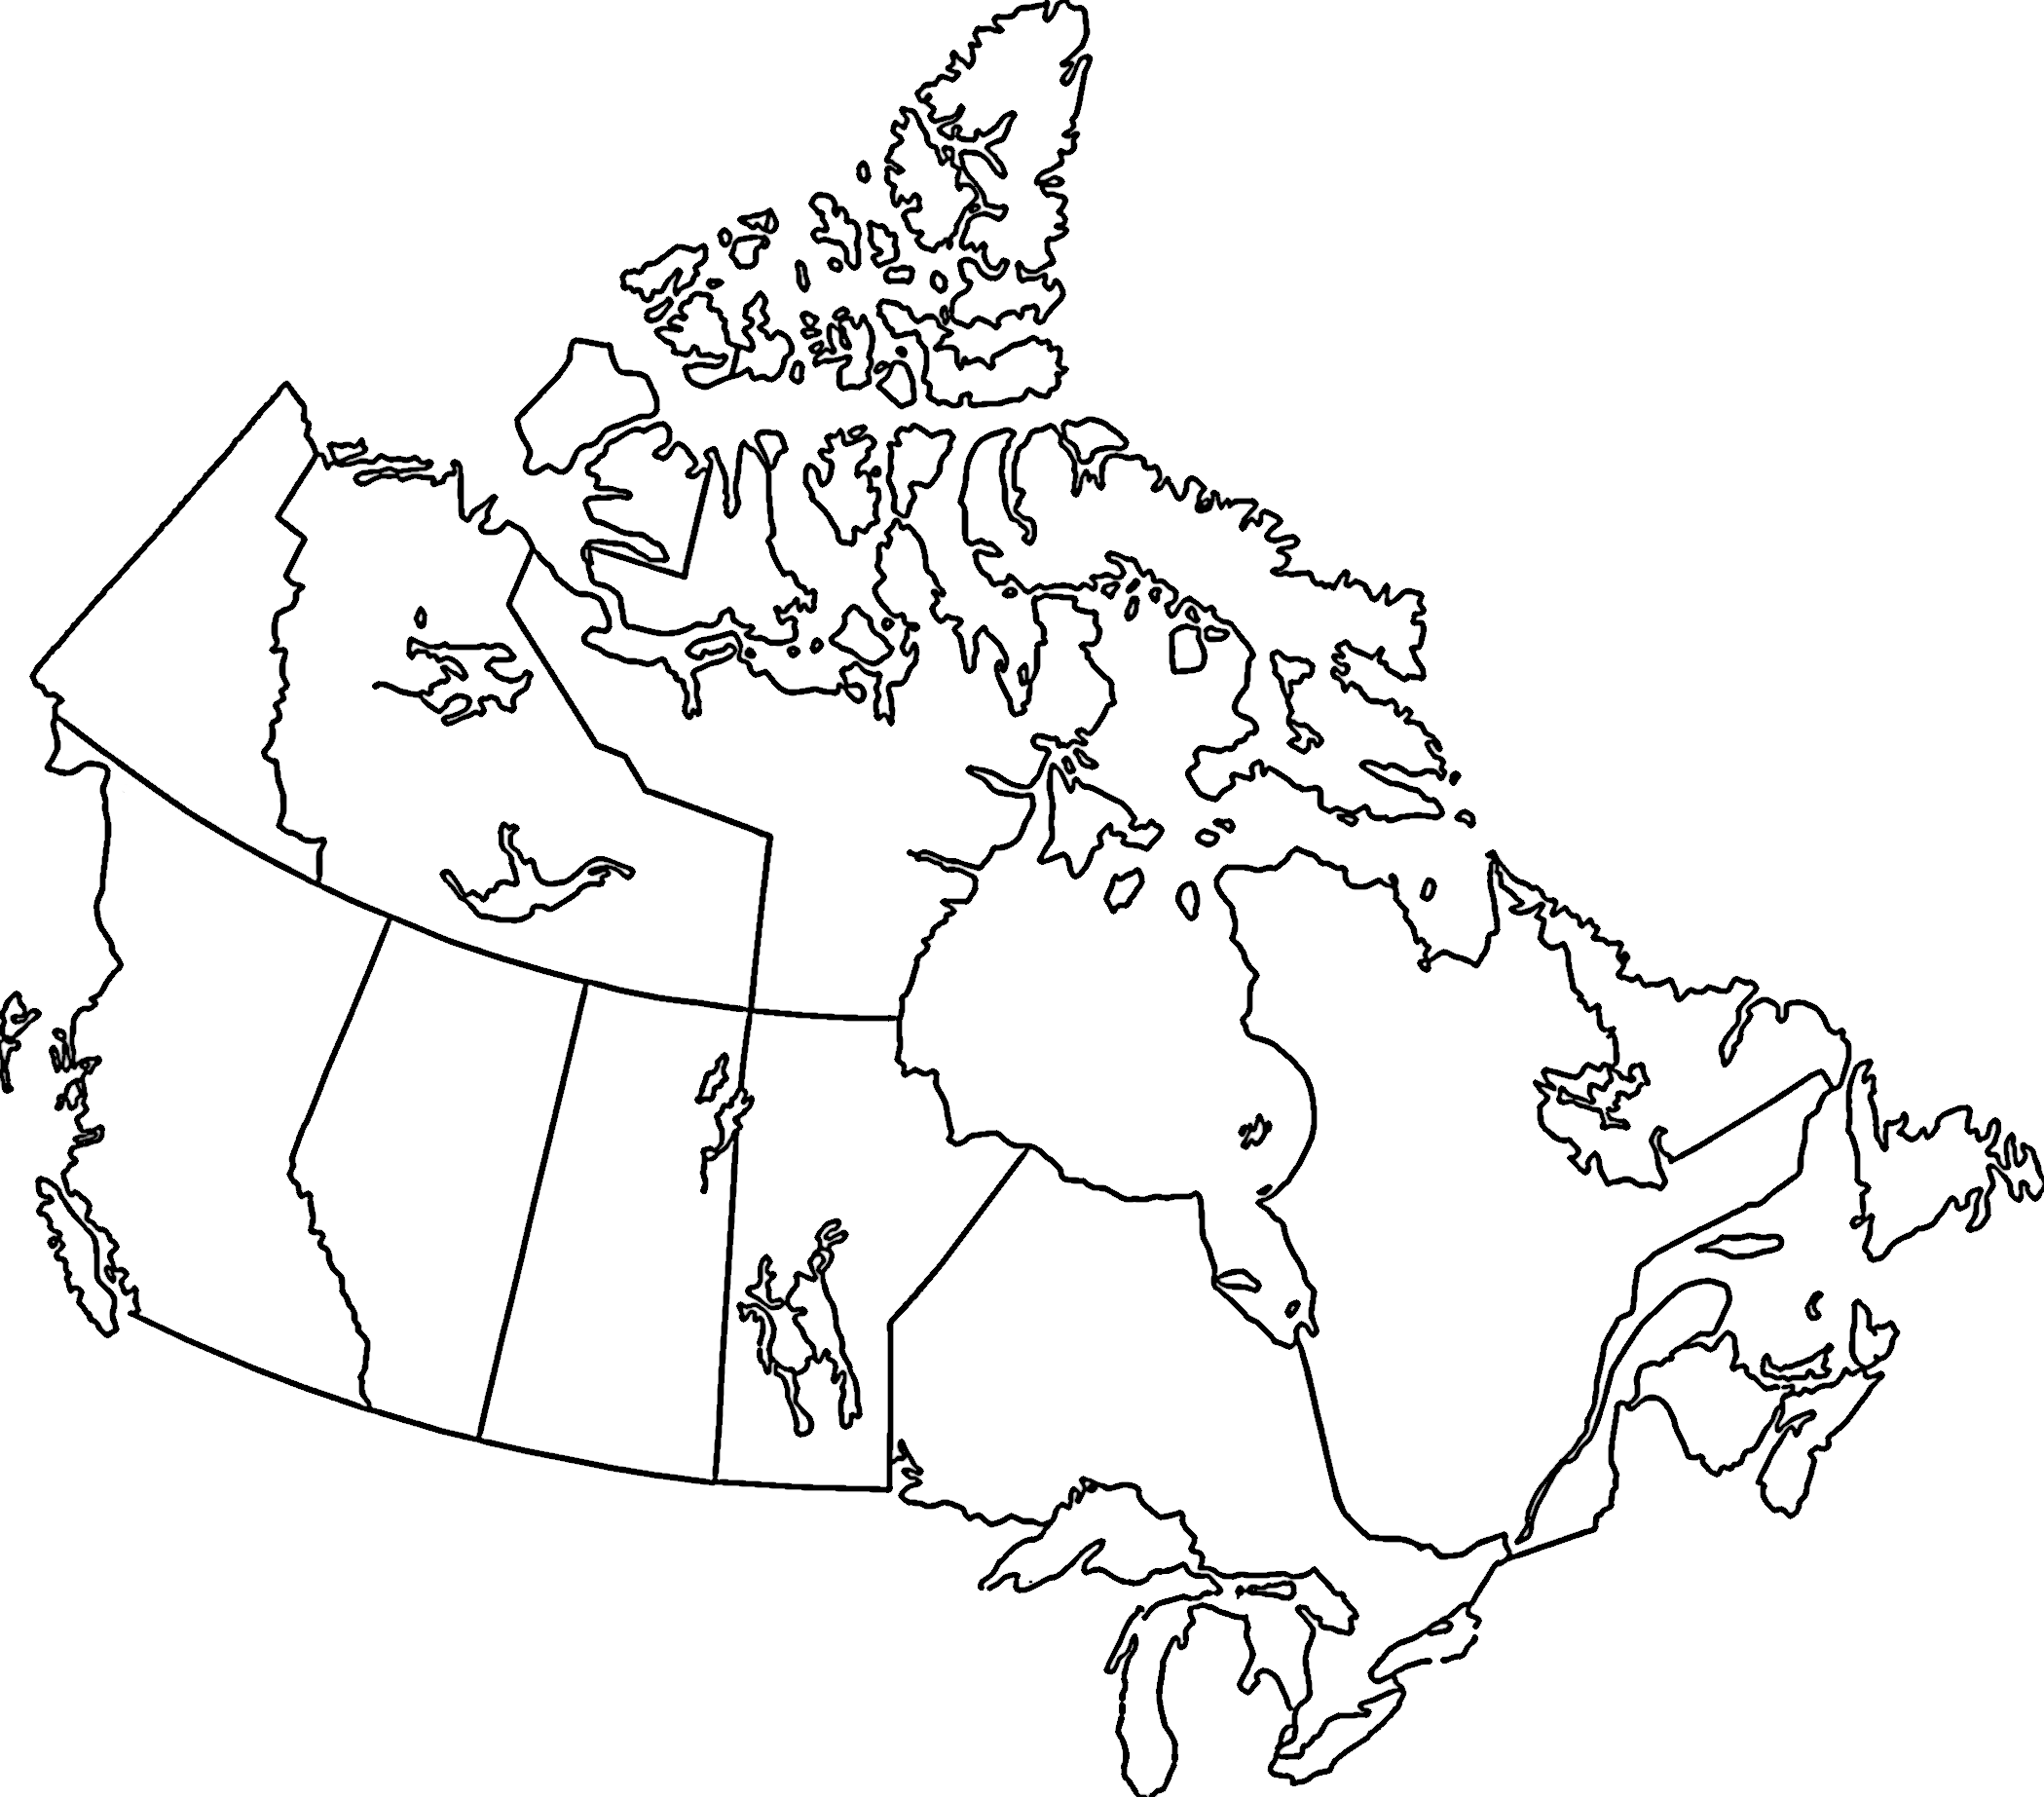 7-best-images-of-printable-outline-maps-of-canada-blank-canada-map